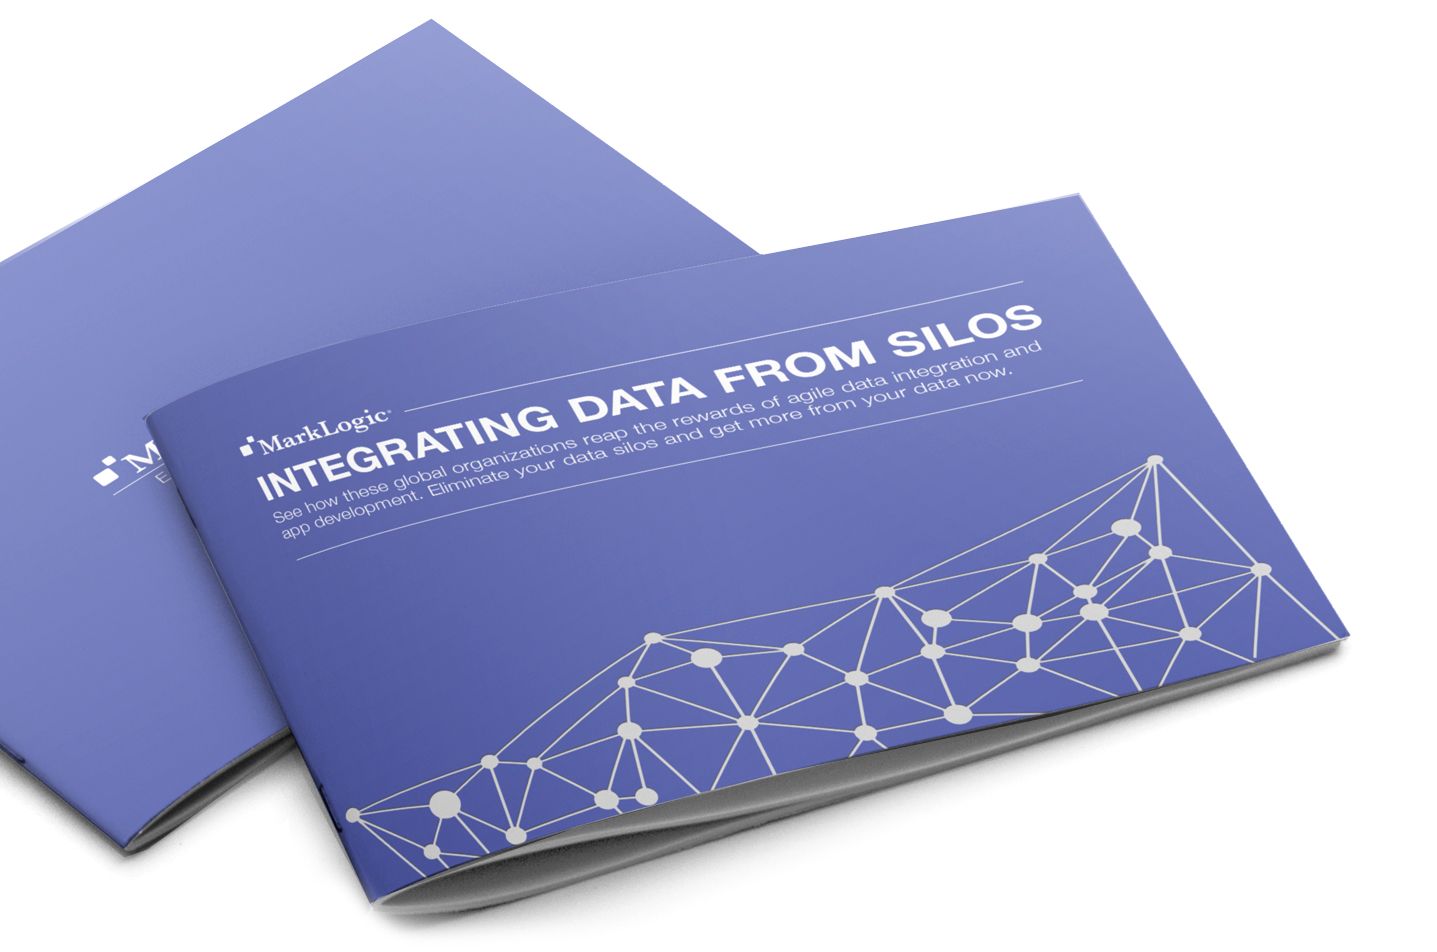 Integrating Data from Silos Book